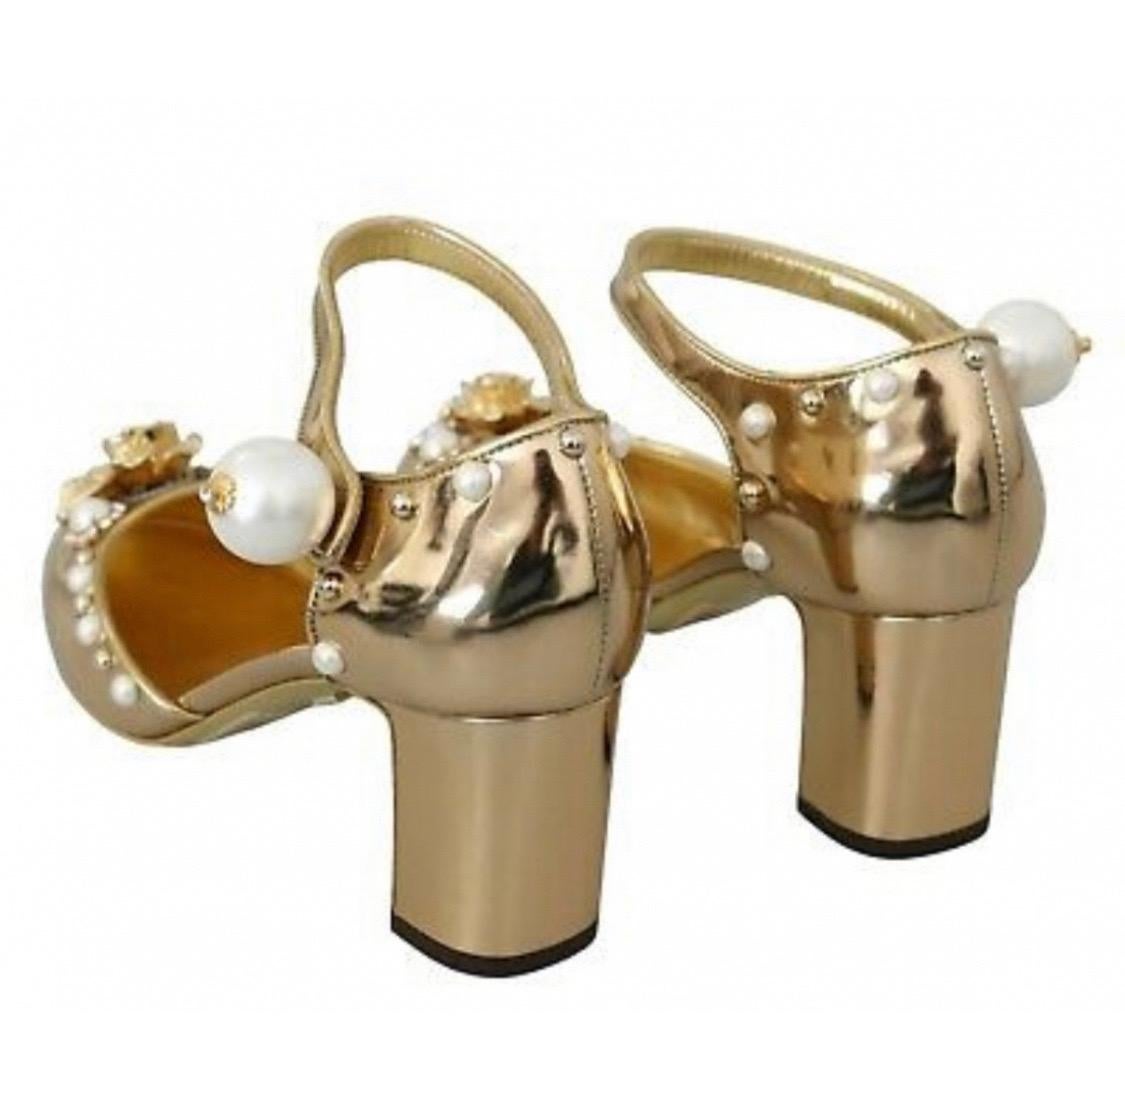 Dolce & Gabbana gold leather ankle strap sandals shoes heels  6